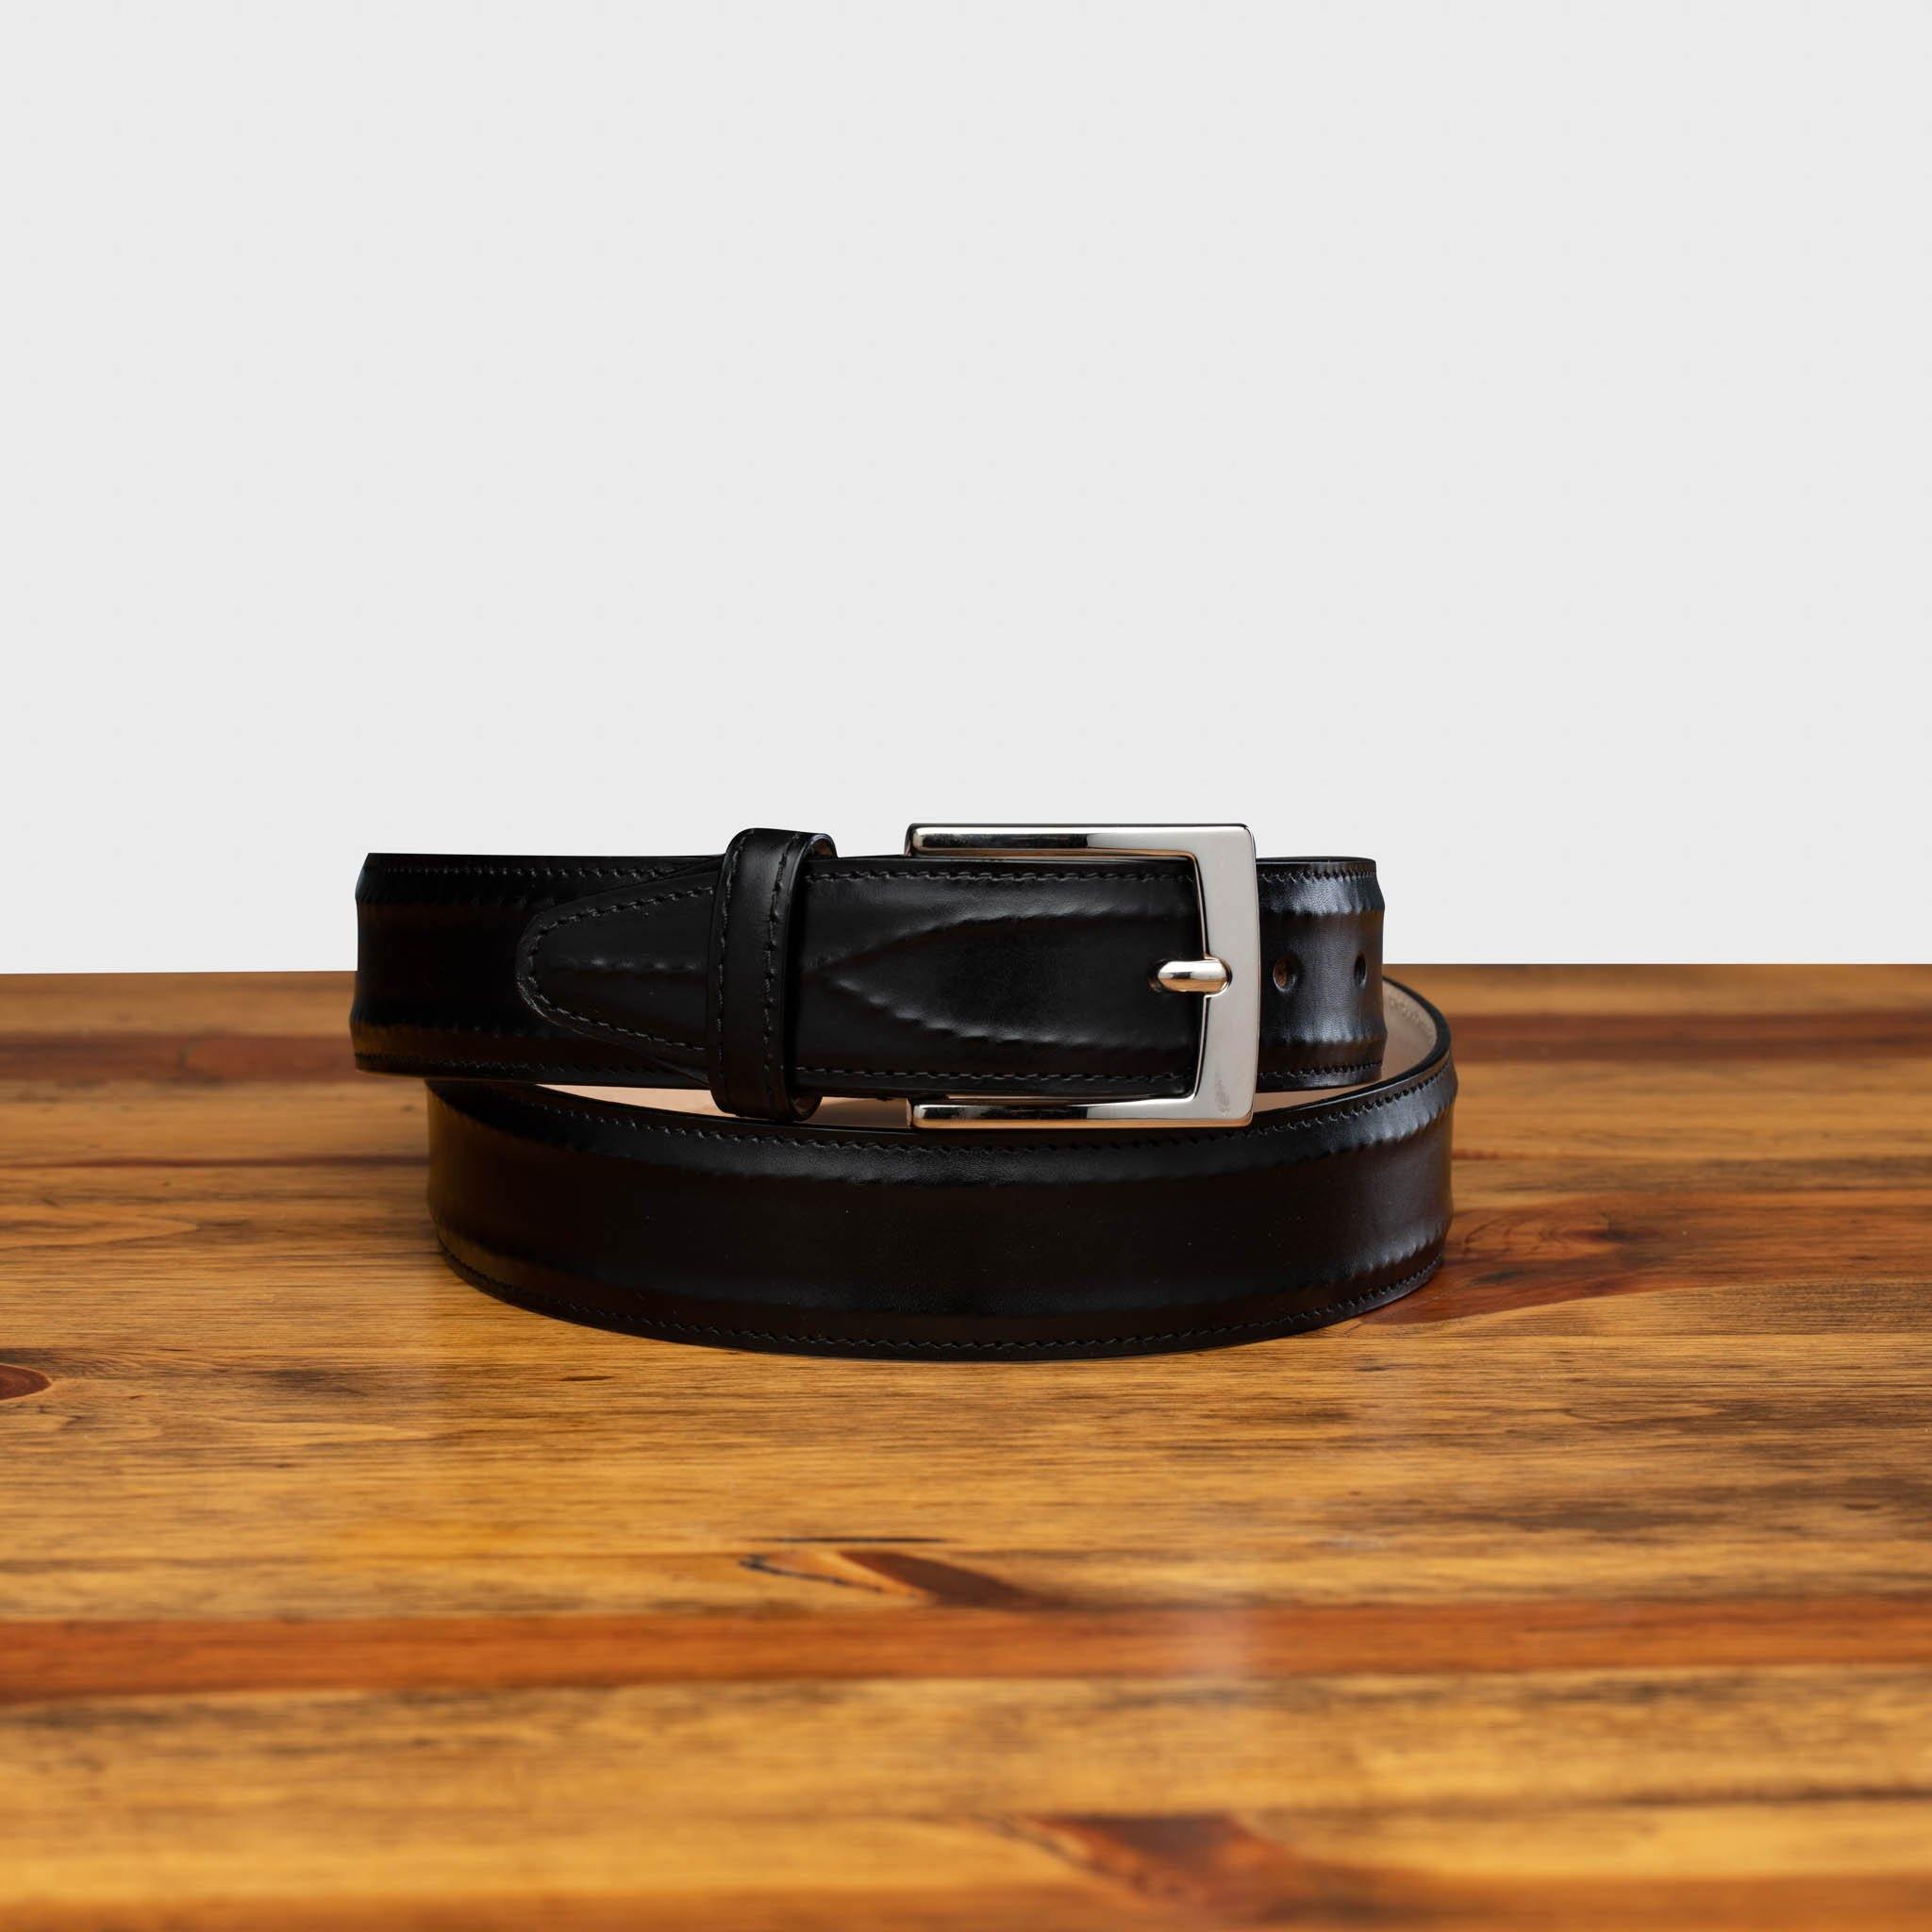 Front profile of C2216 Calzoleria Toscana Black Inner Stitched Dress Belt curled up on top of a wooden table